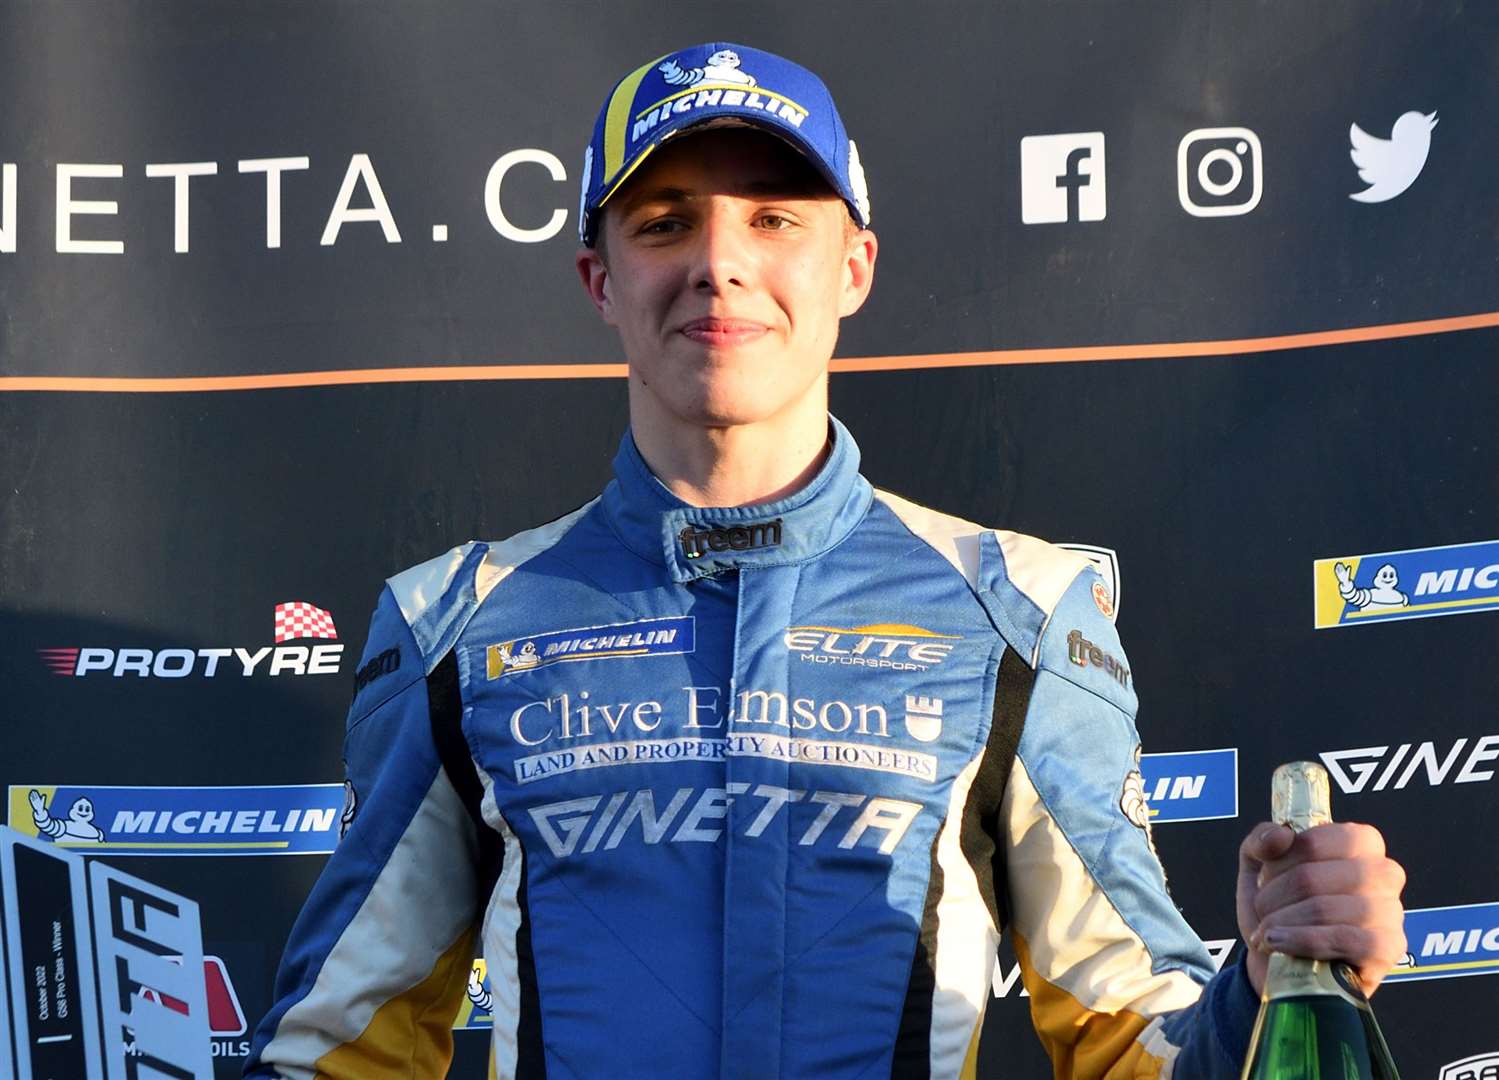 Hythe's Tom Emson scored his first Ginetta GT4 Supercup victory on the Brands Hatch GP loop last season; he took another two wins at the weekend